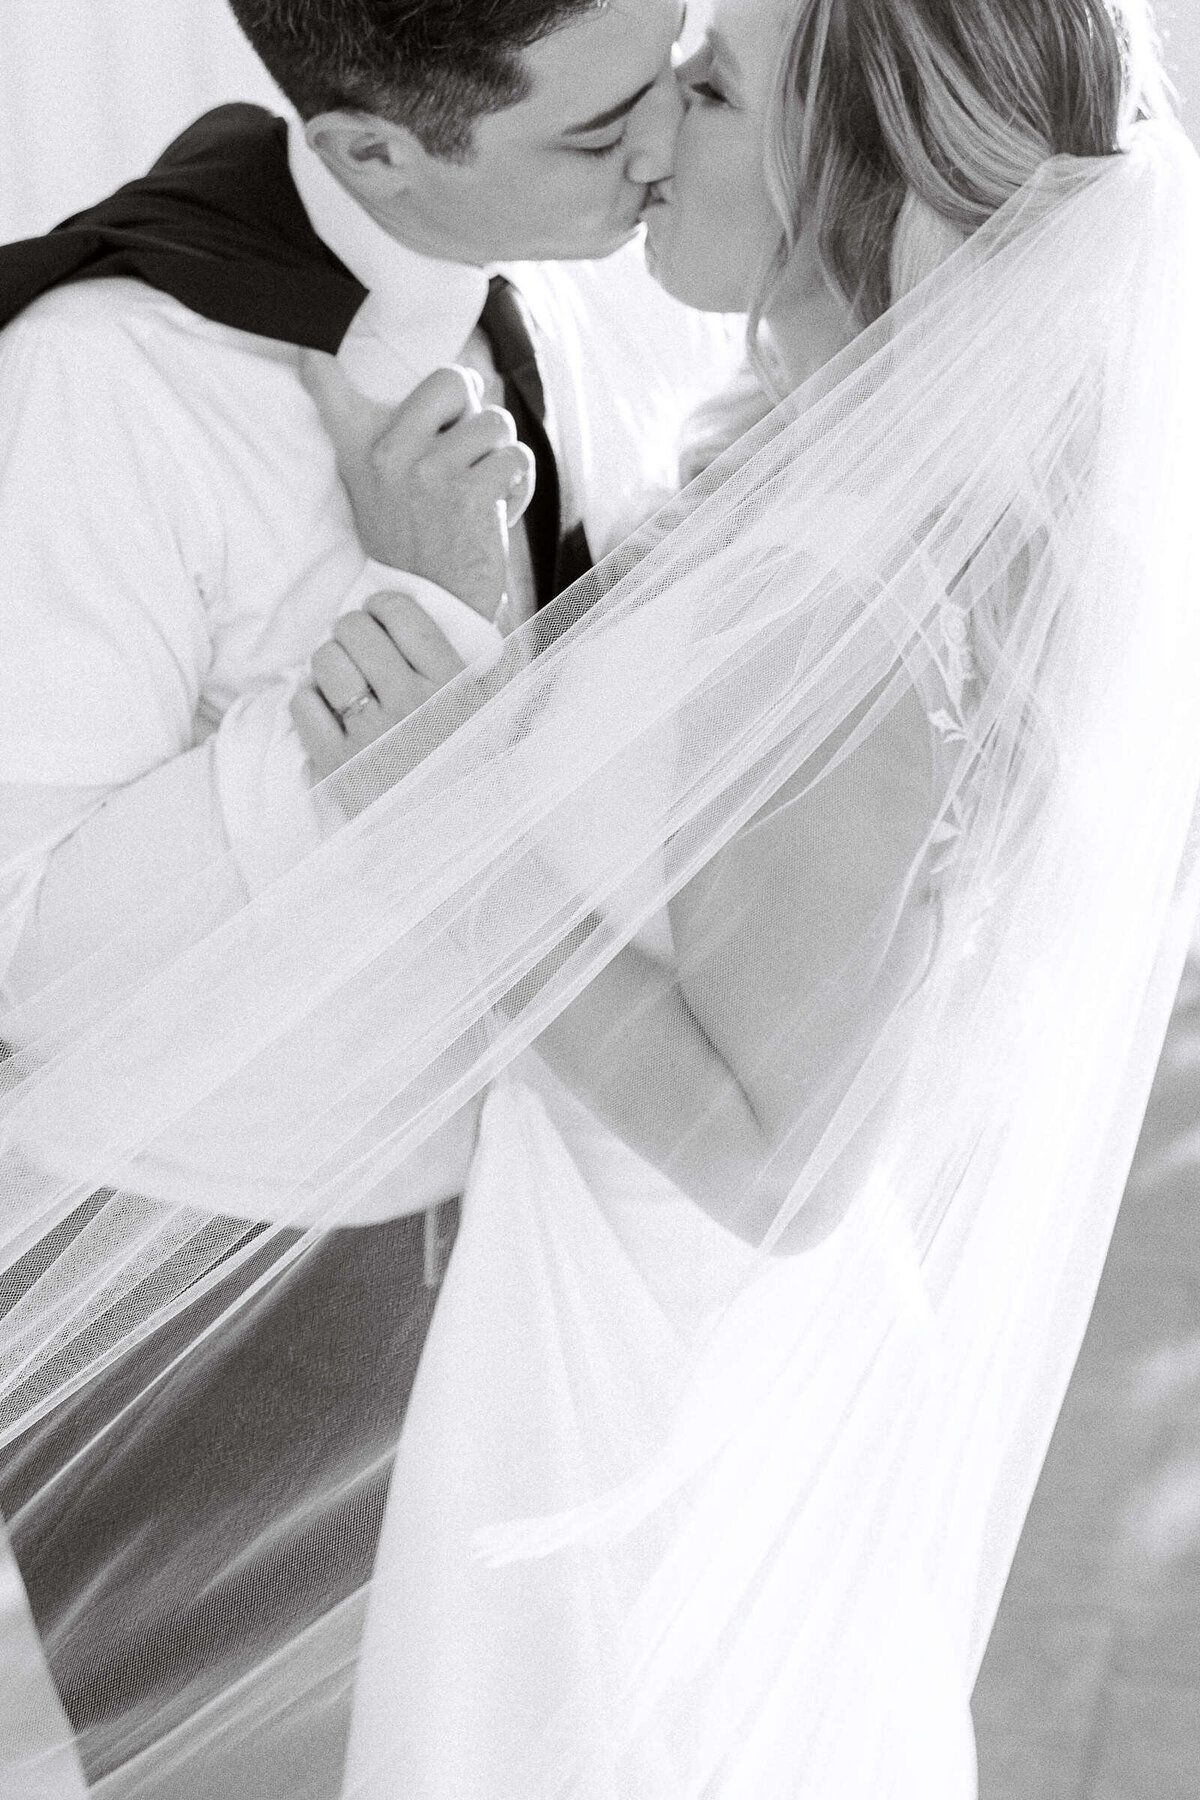 Newly married couple kisses while wrapped in veil at North Texas wedding